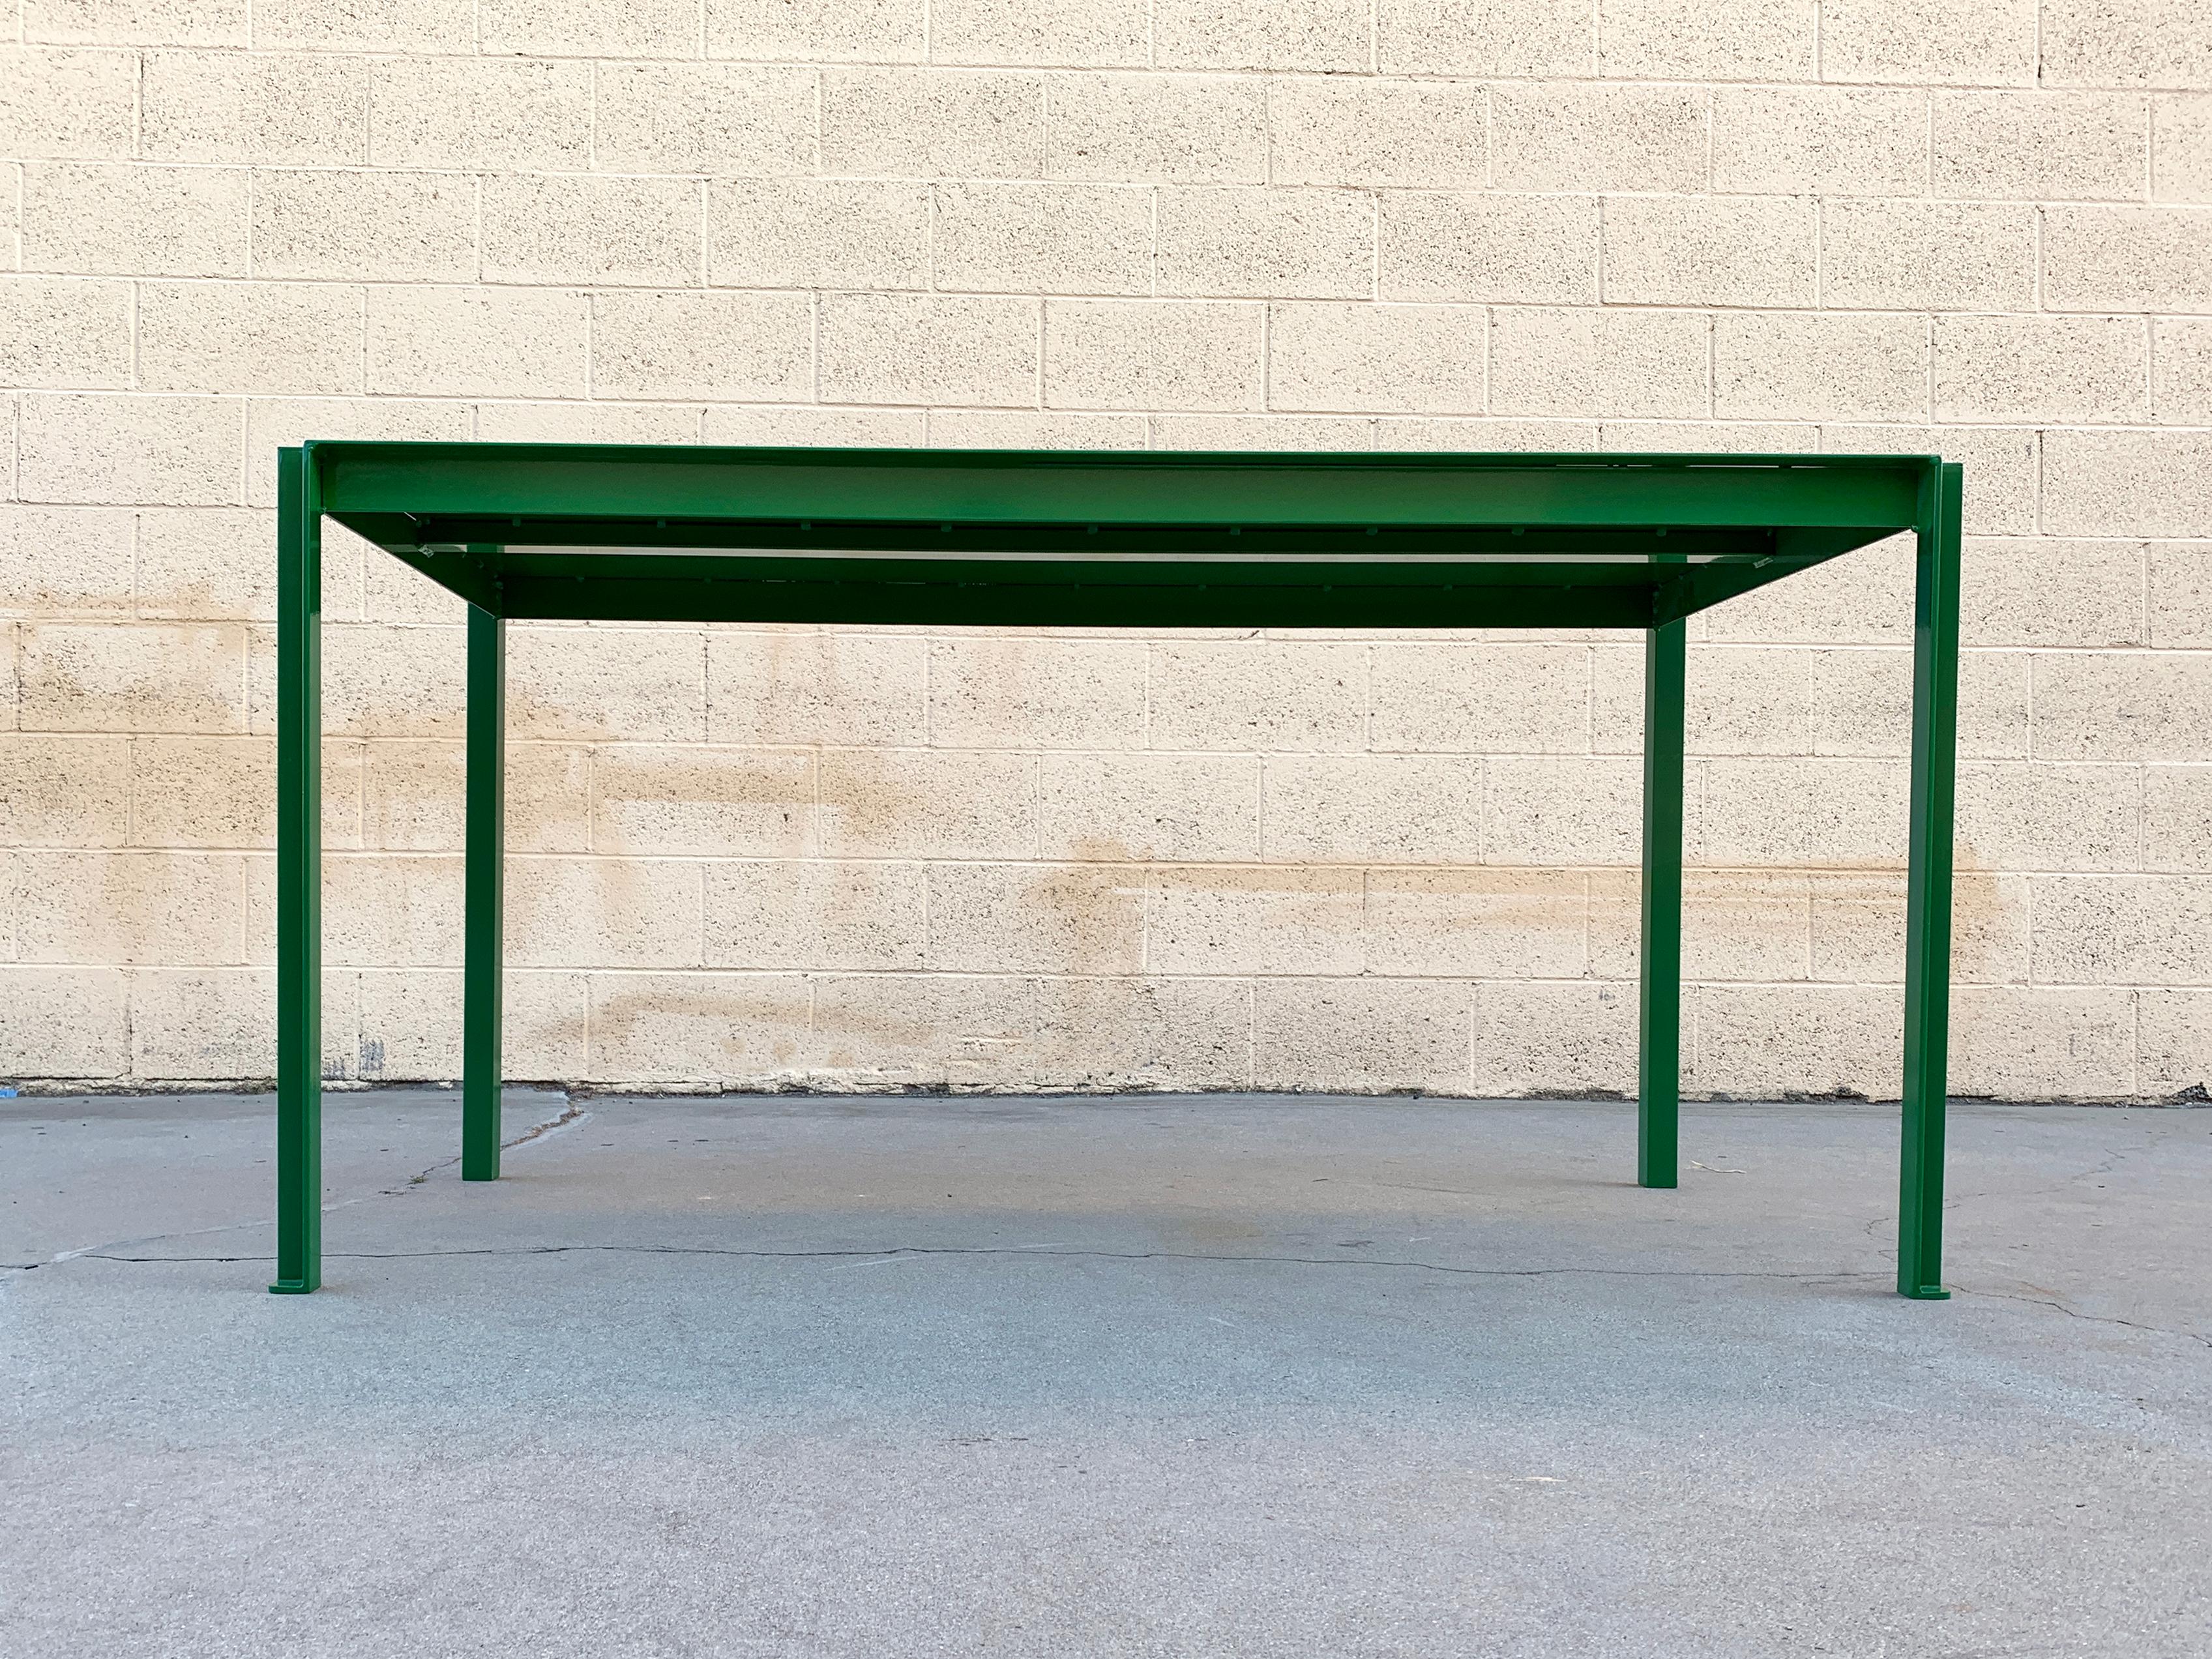 Return policy: This is a custom made piece. All sales final on custom orders and custom fabrications.

Multi-purpose steel table, custom made to order. Tanker inspired, yet sleek and minimalist, ideal for use as a dining table, in a work space or as